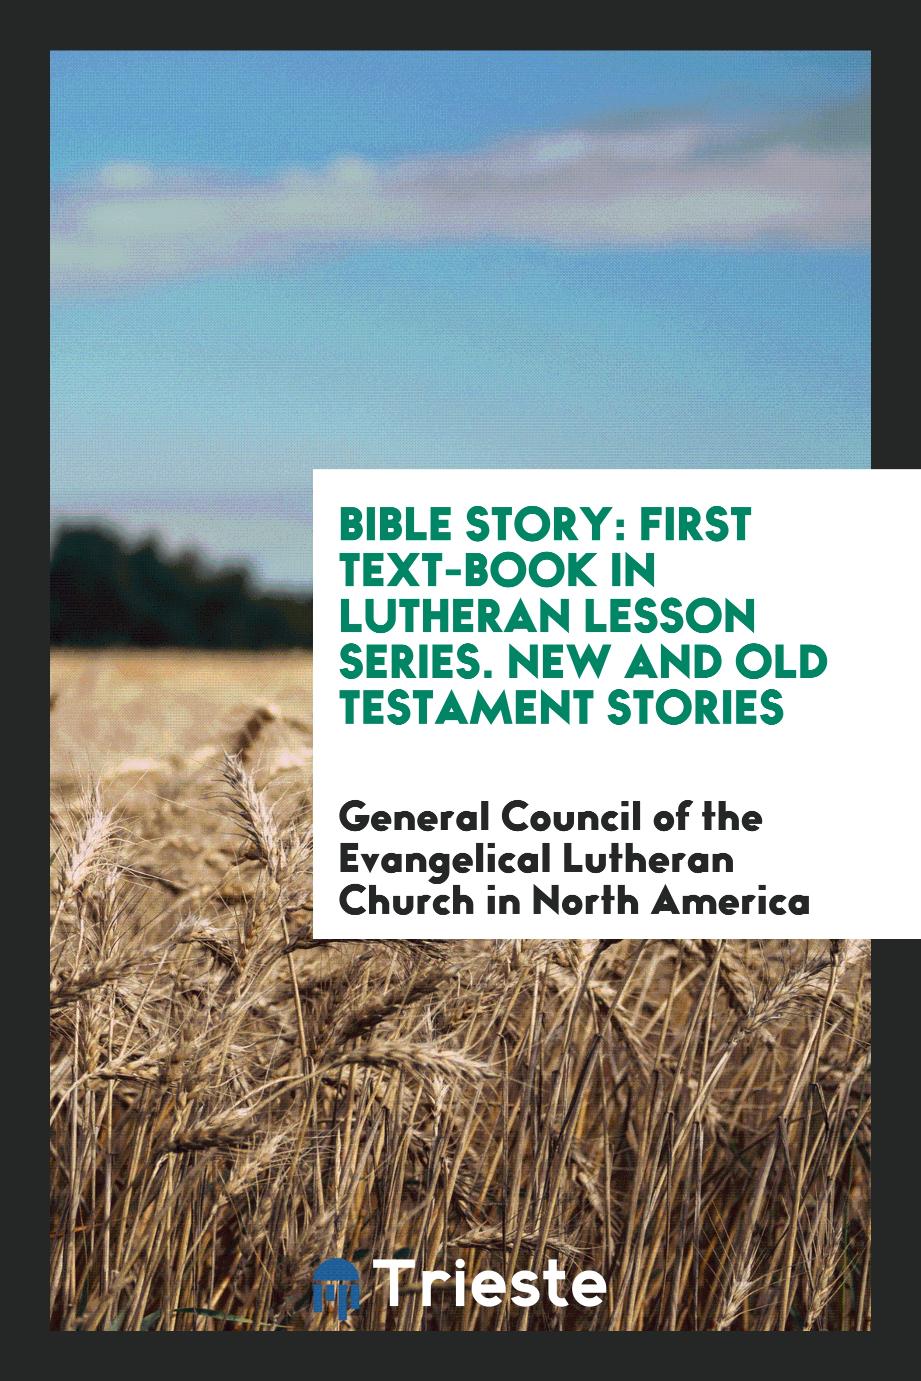 Bible Story: First Text-Book in Lutheran Lesson Series. New and Old Testament Stories